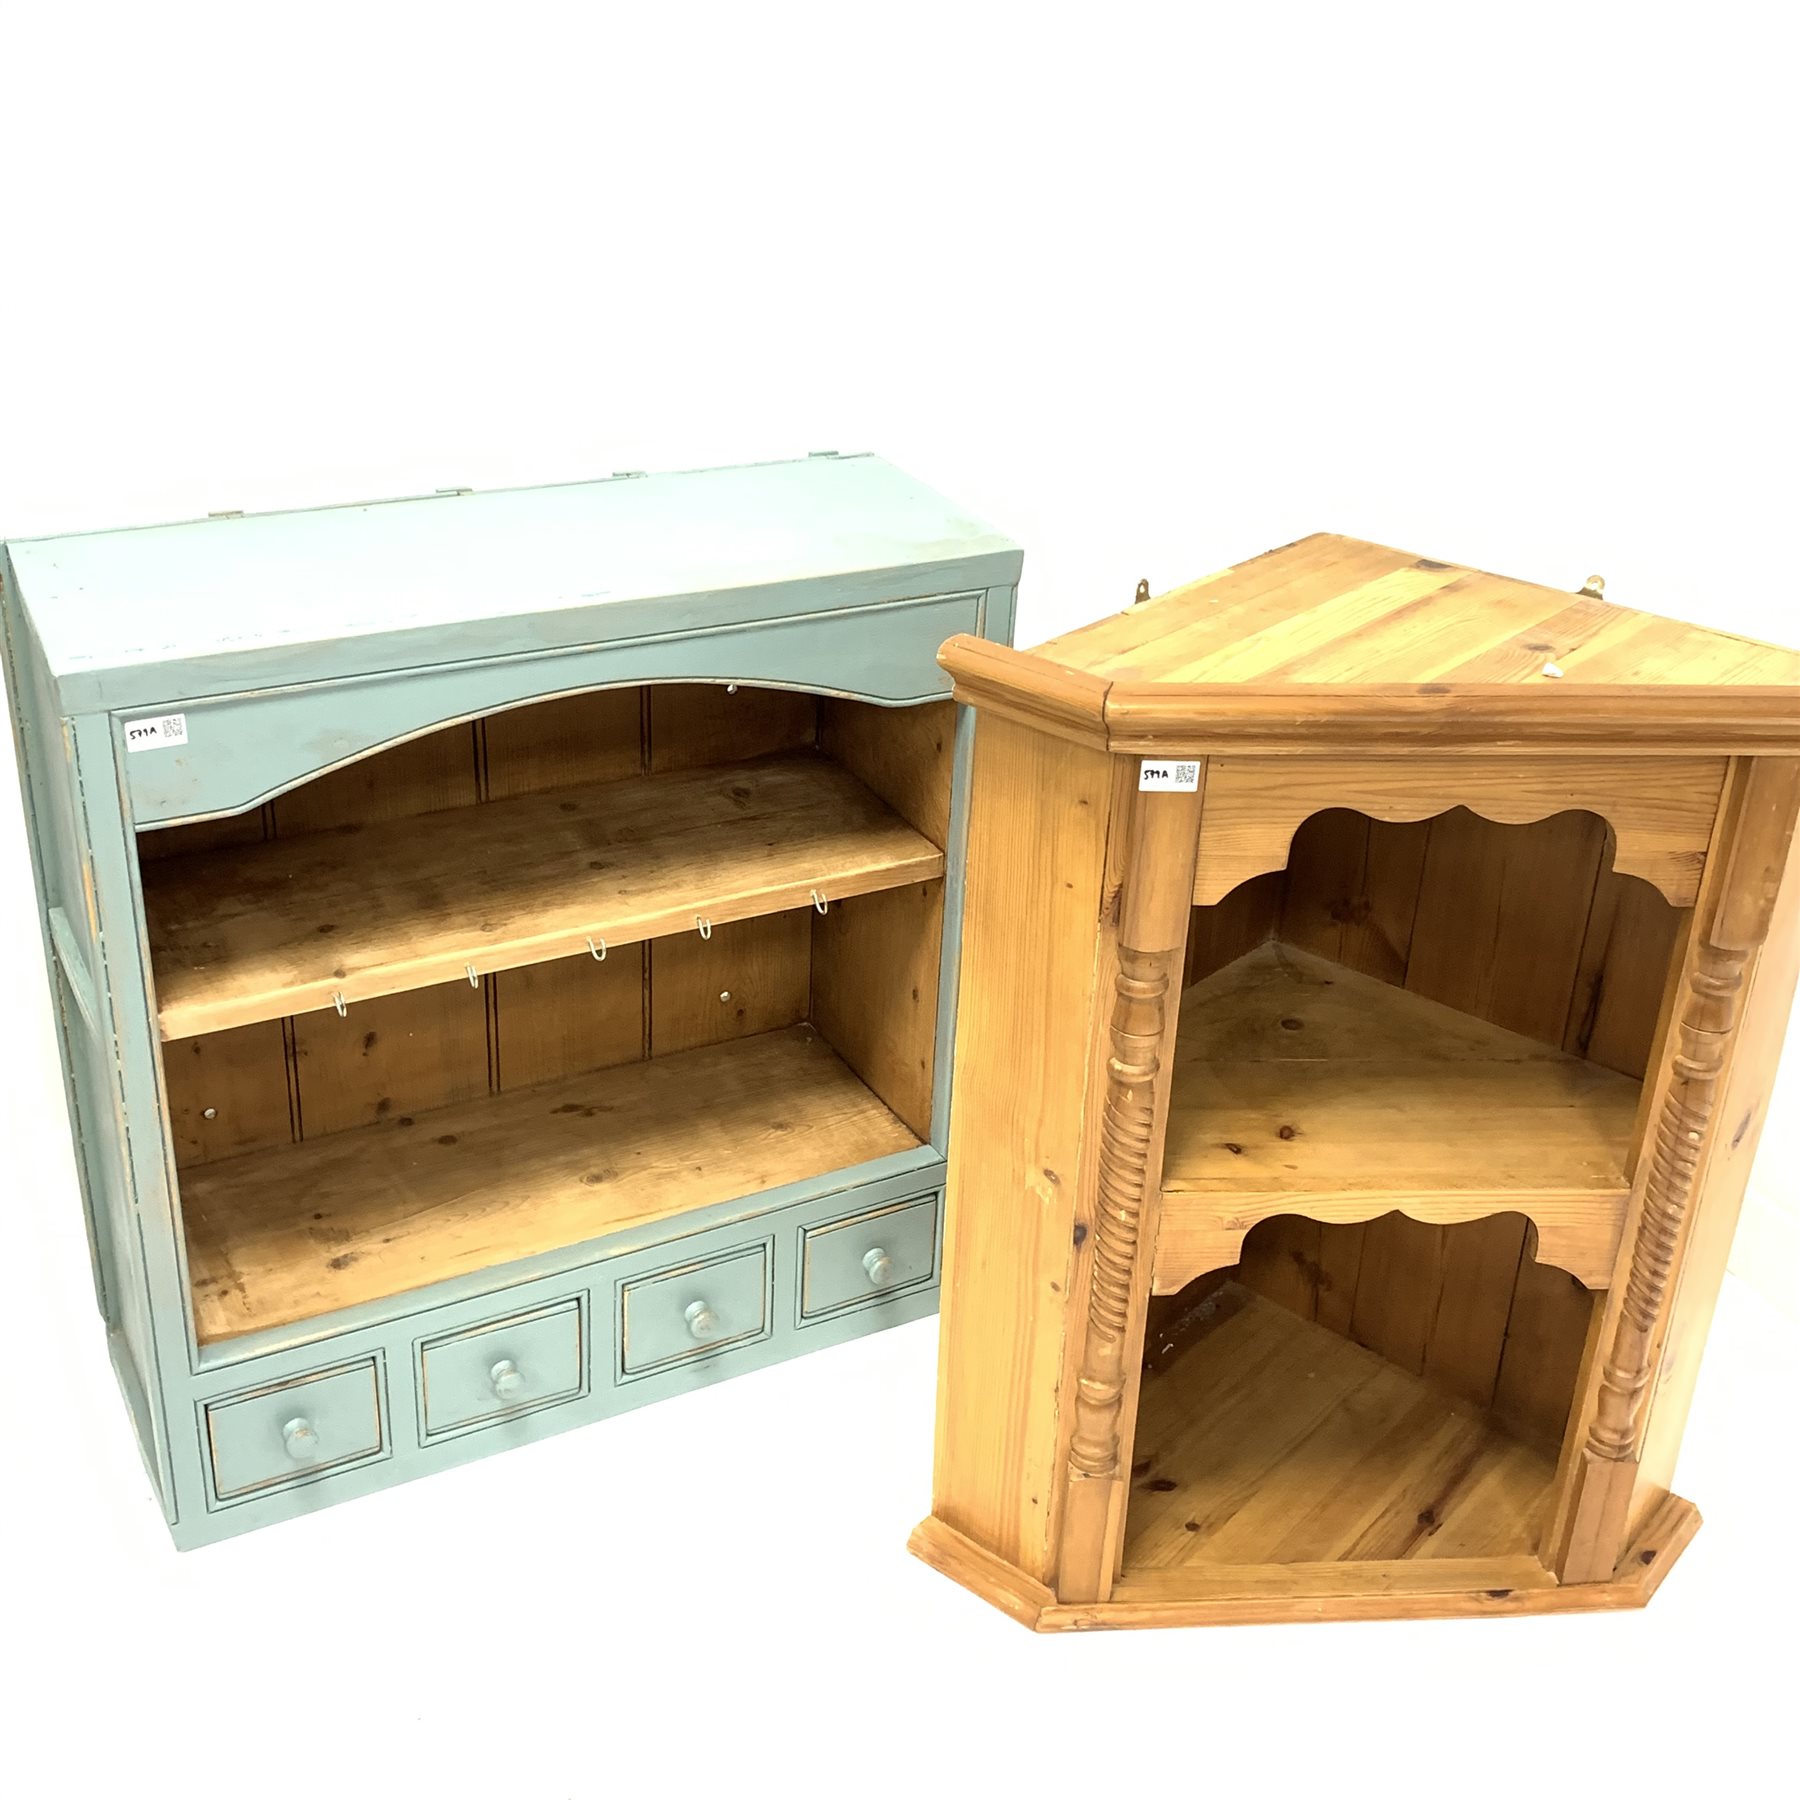 Painted pine wall rack with two open shelves over four spice drawers, (W74cm) and a pine wall hangi - Image 2 of 2